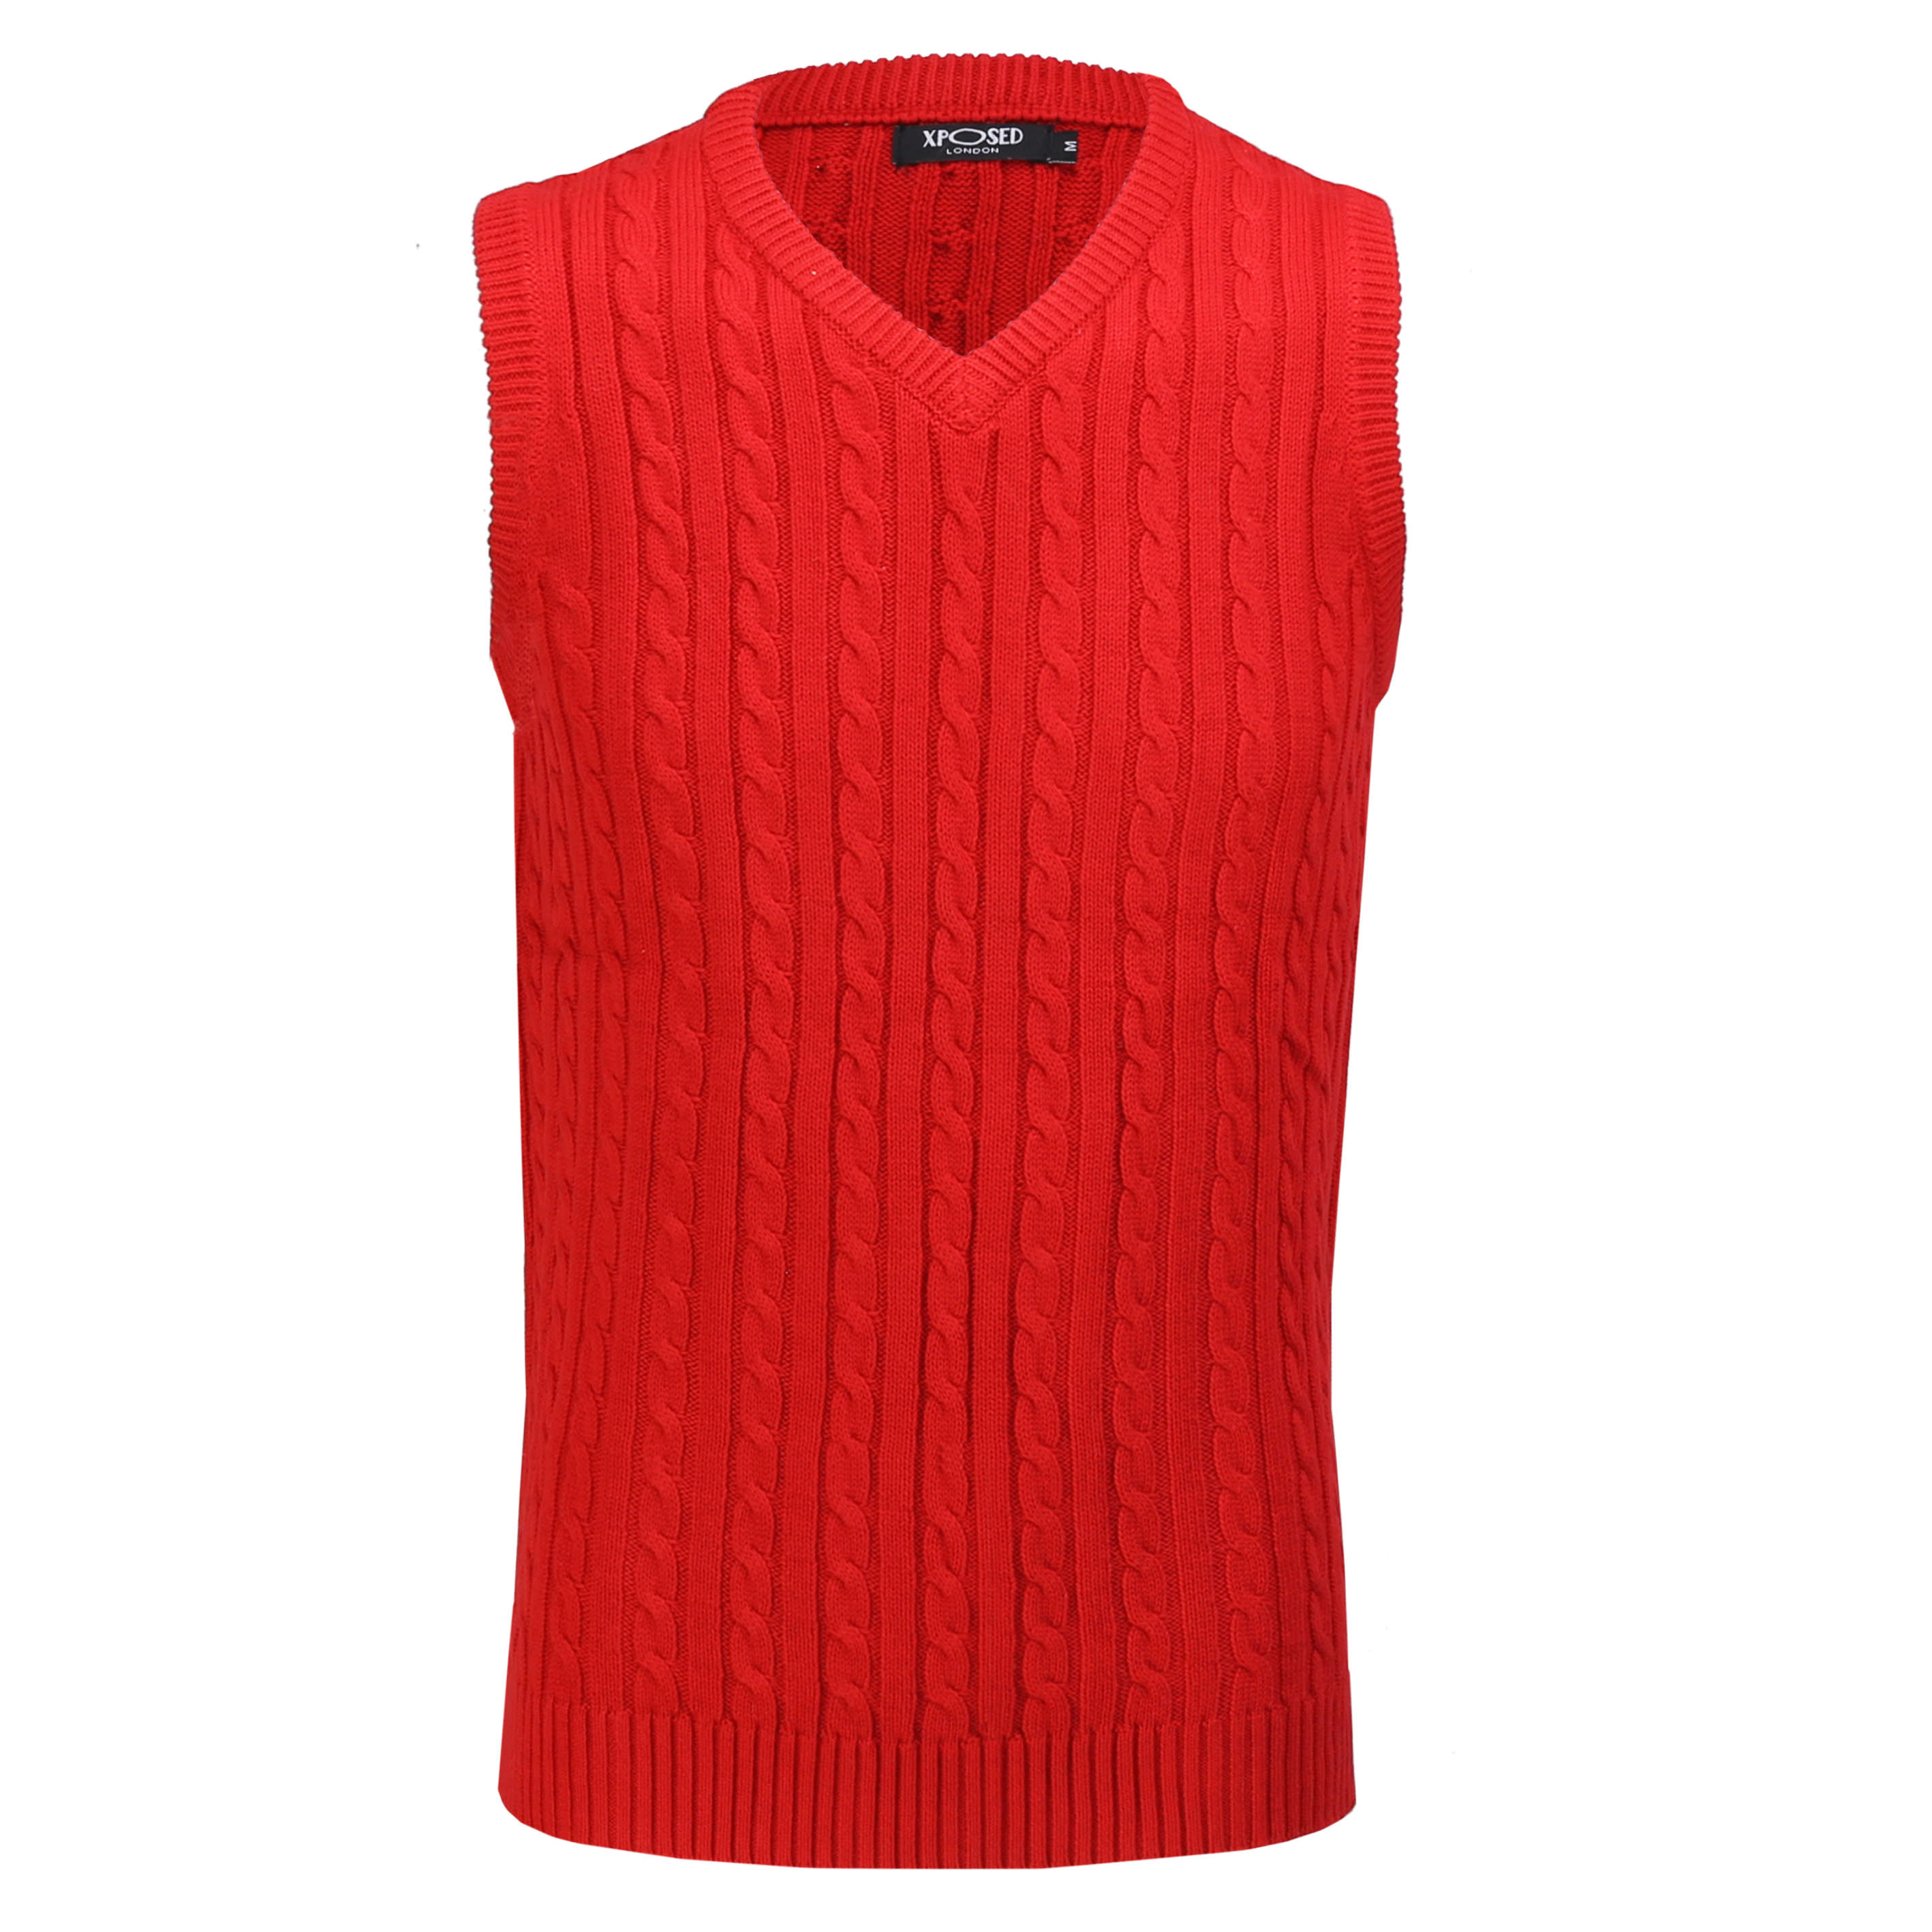 Xposed Mens Classic Cable Knitted Sleeveless V Neck Jumper Smart Casual Sweater Jersey Vest Top 